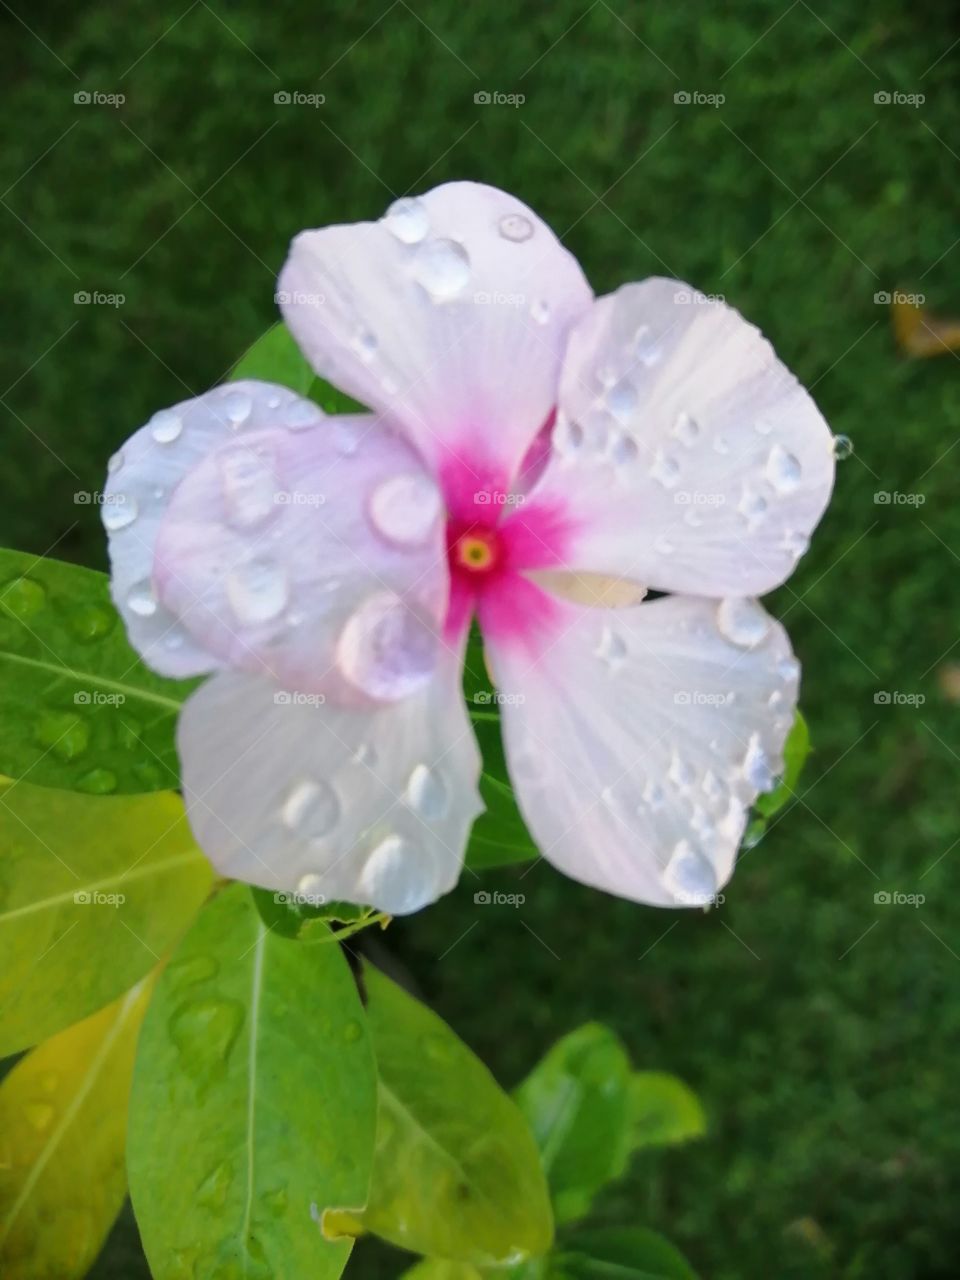 Wow! There's a raindrops on the flower.